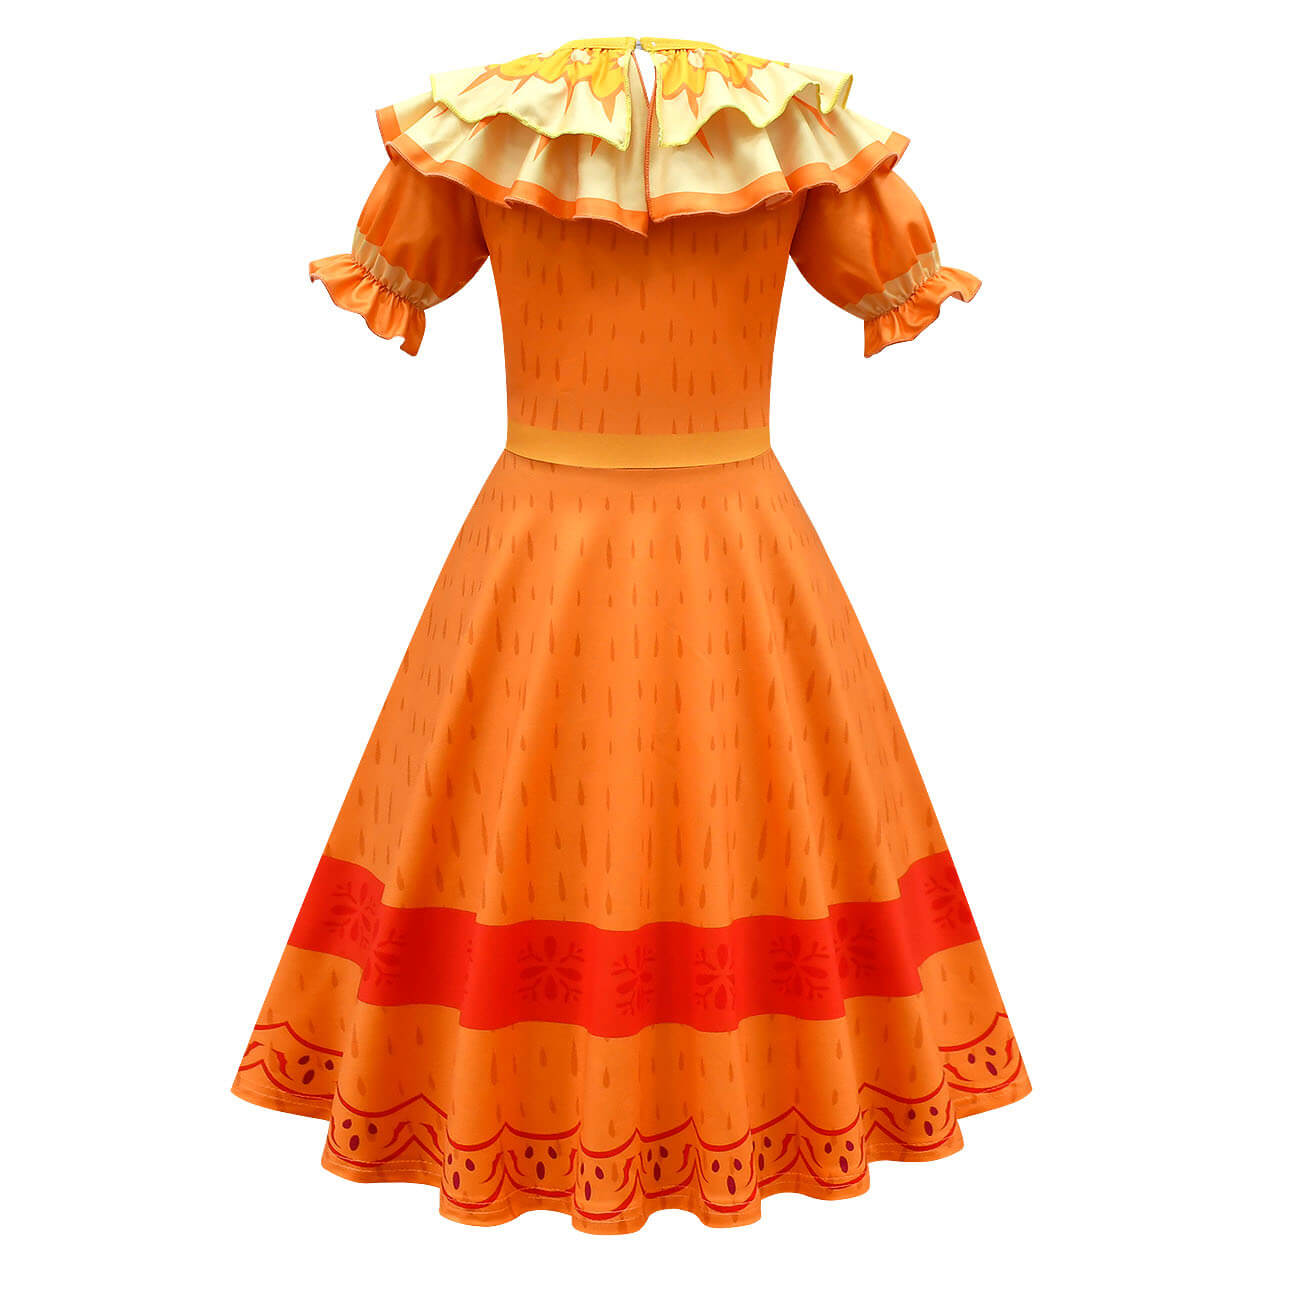 Girls Pepa Dress Fancy Madrigal Family Party Cosplay Outfit for Kids Party Costume